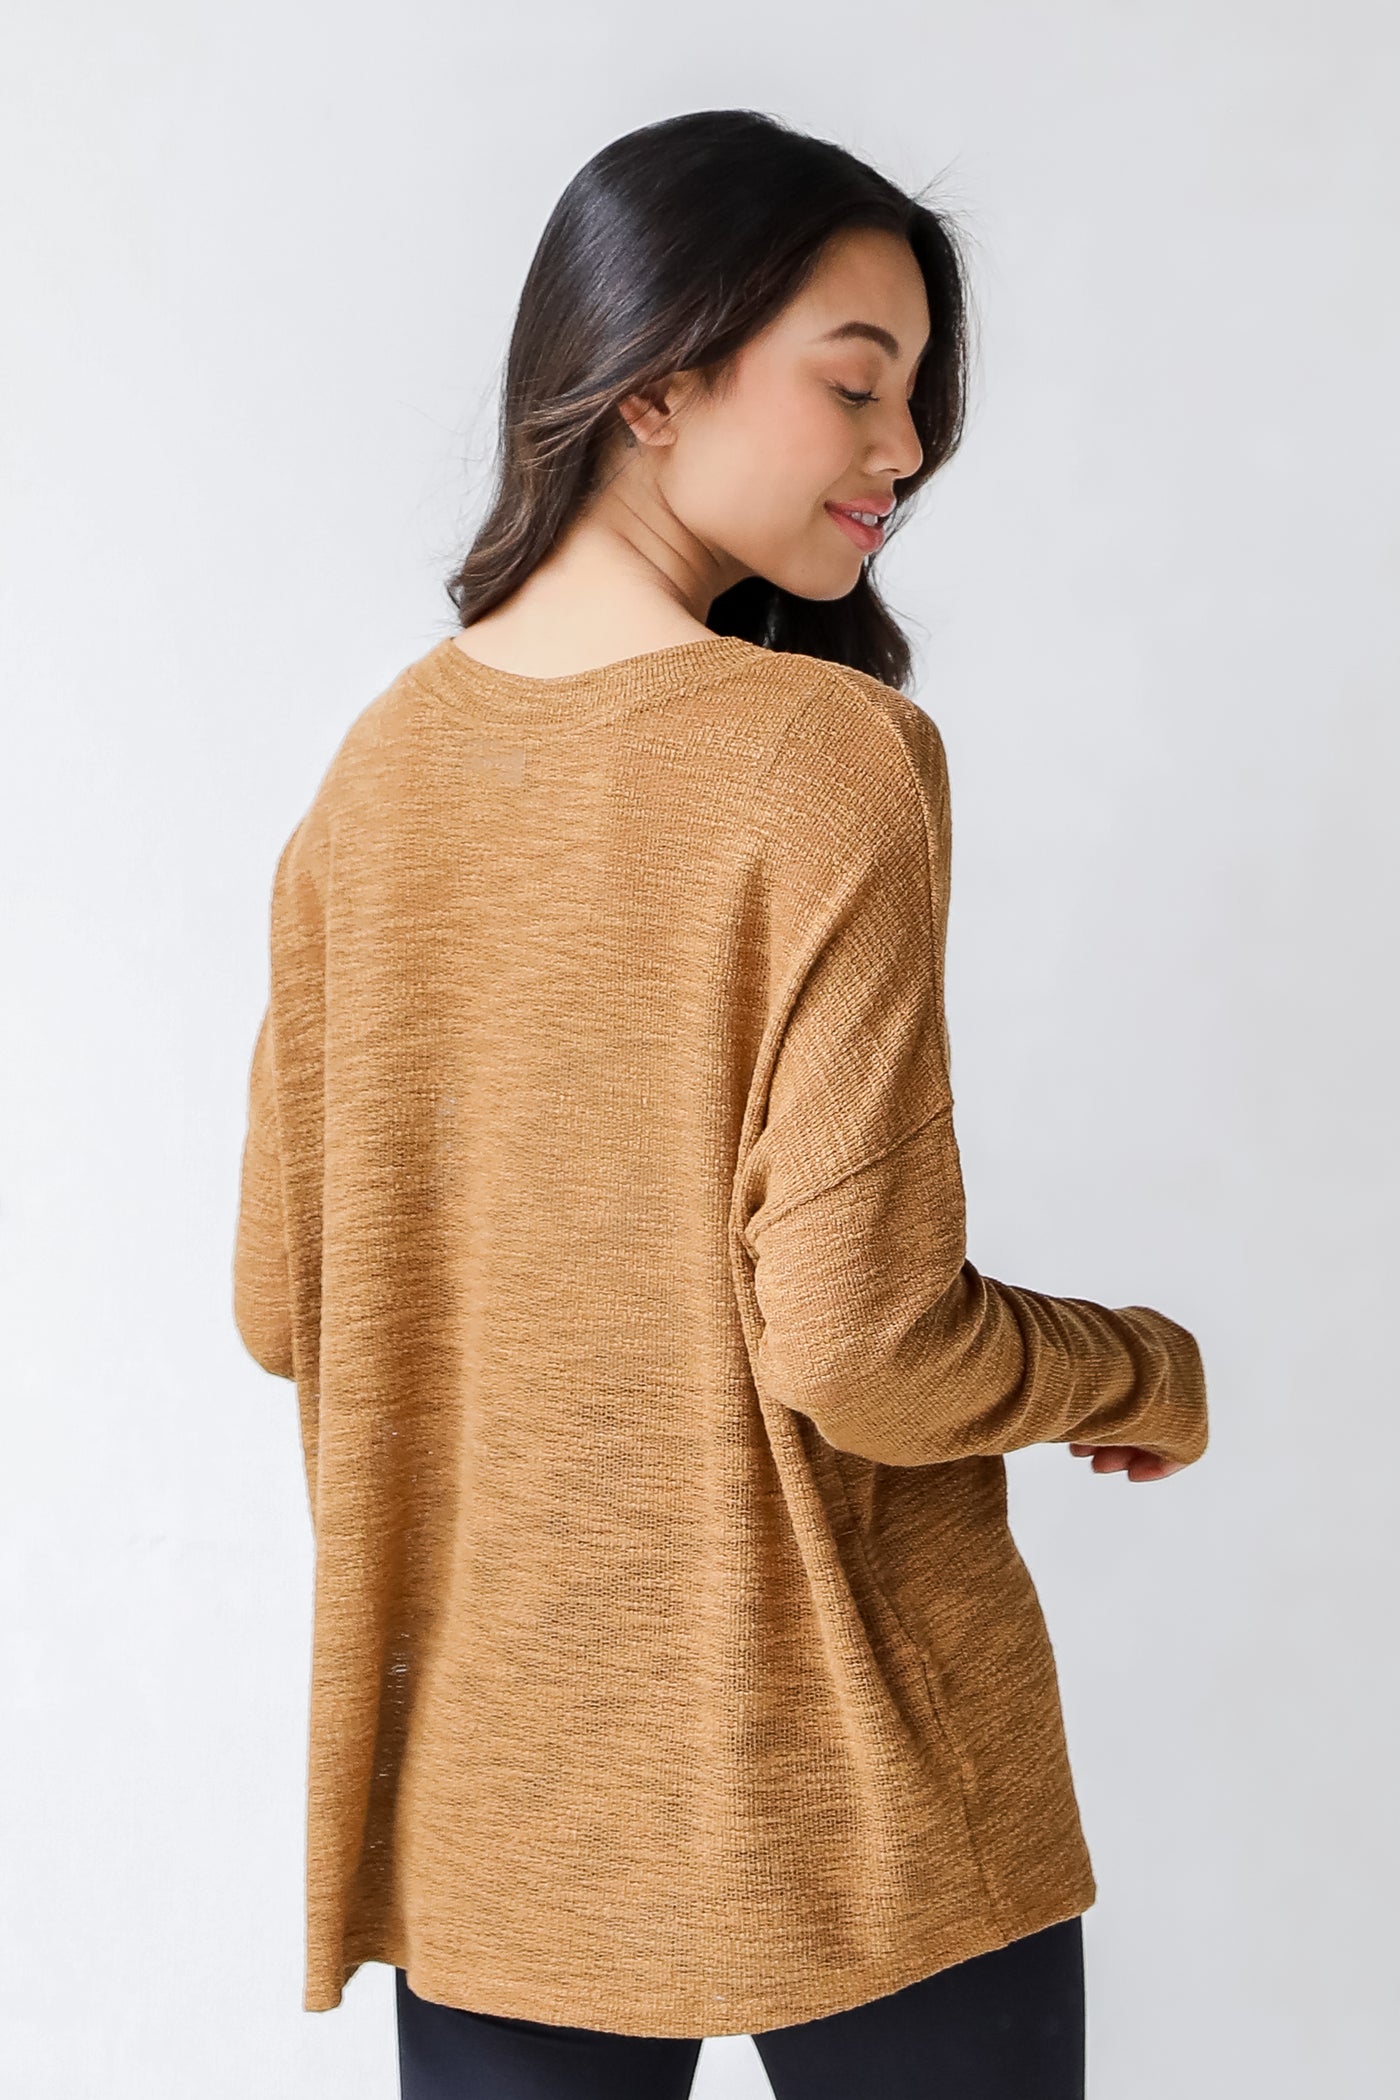 Knit Top in camel back view